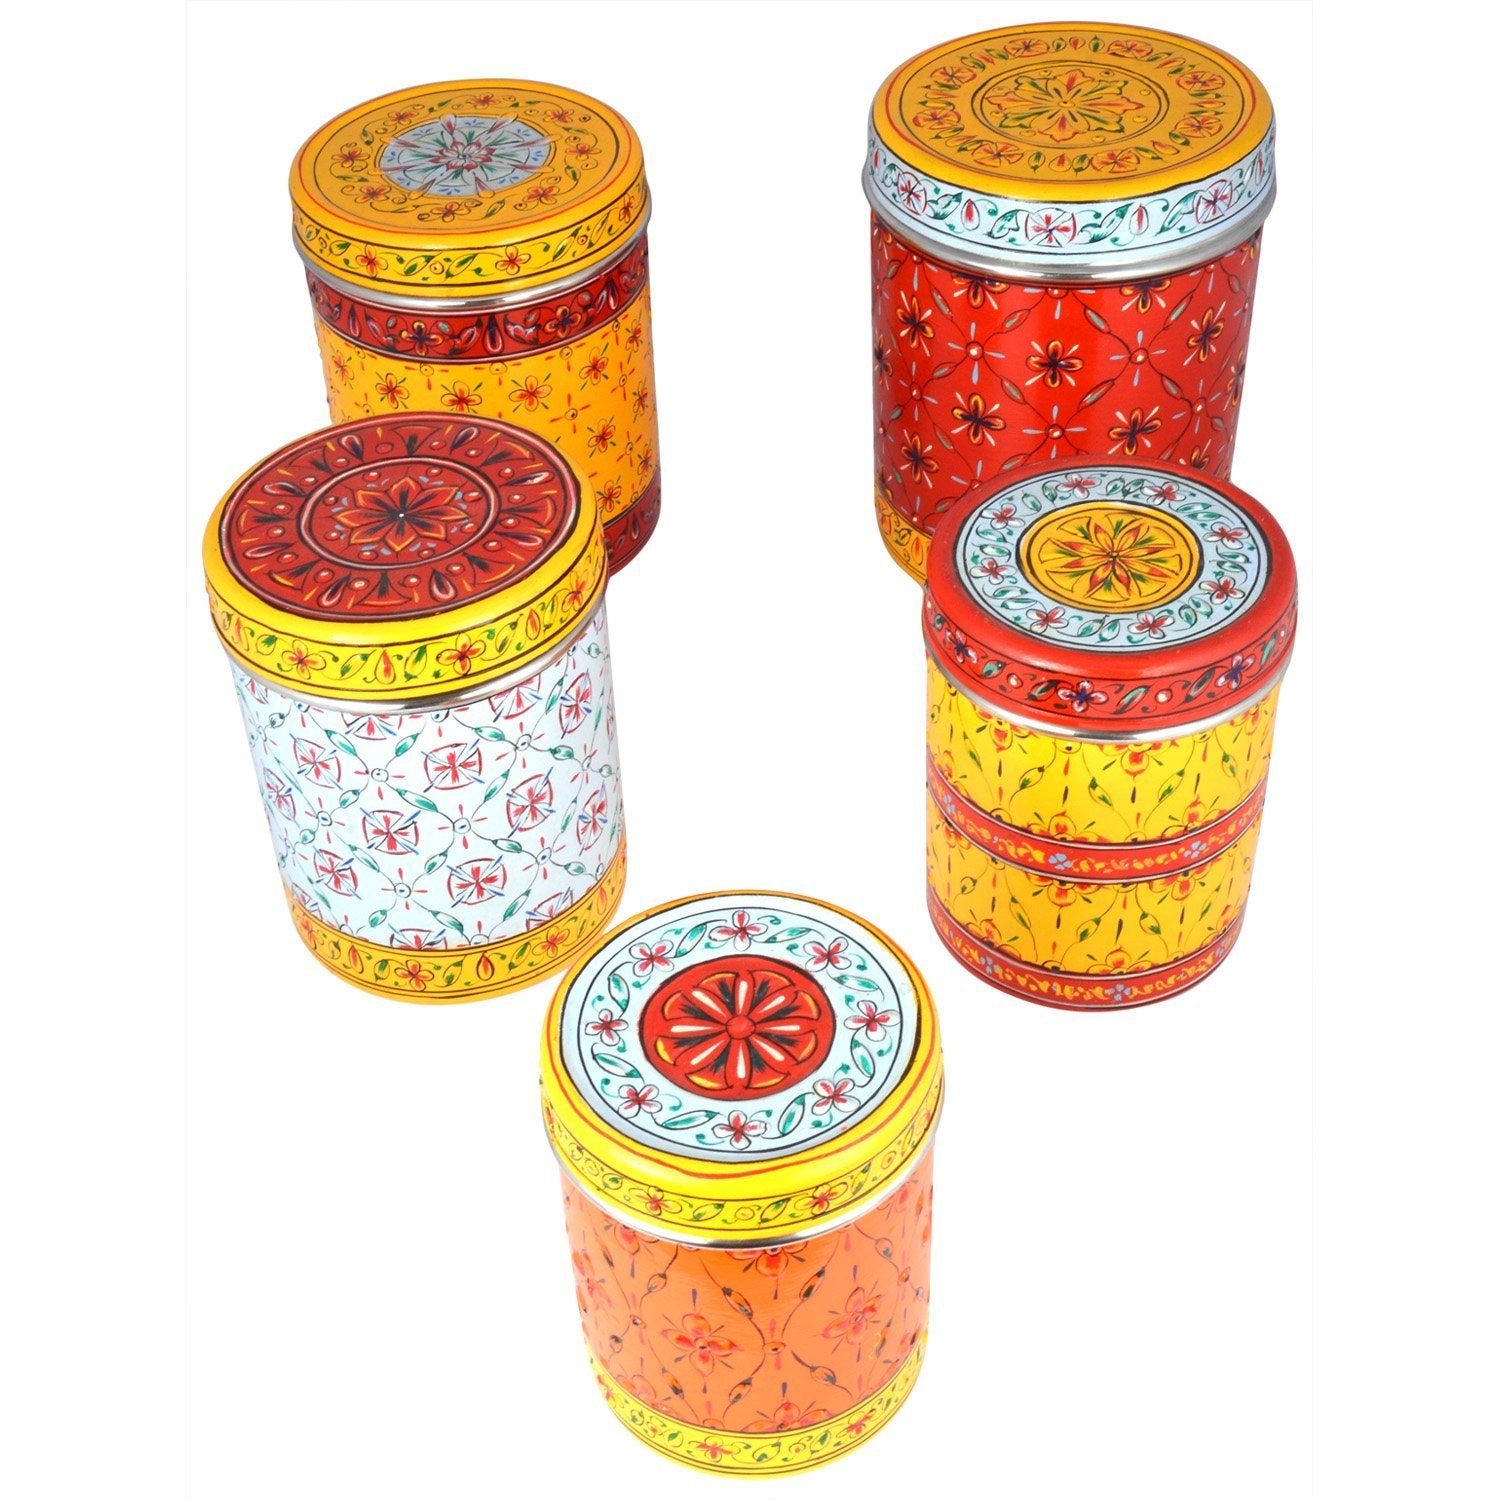 Canister set of 5 containers: Hand Painted Storage Stainless Steel Nesting Jars